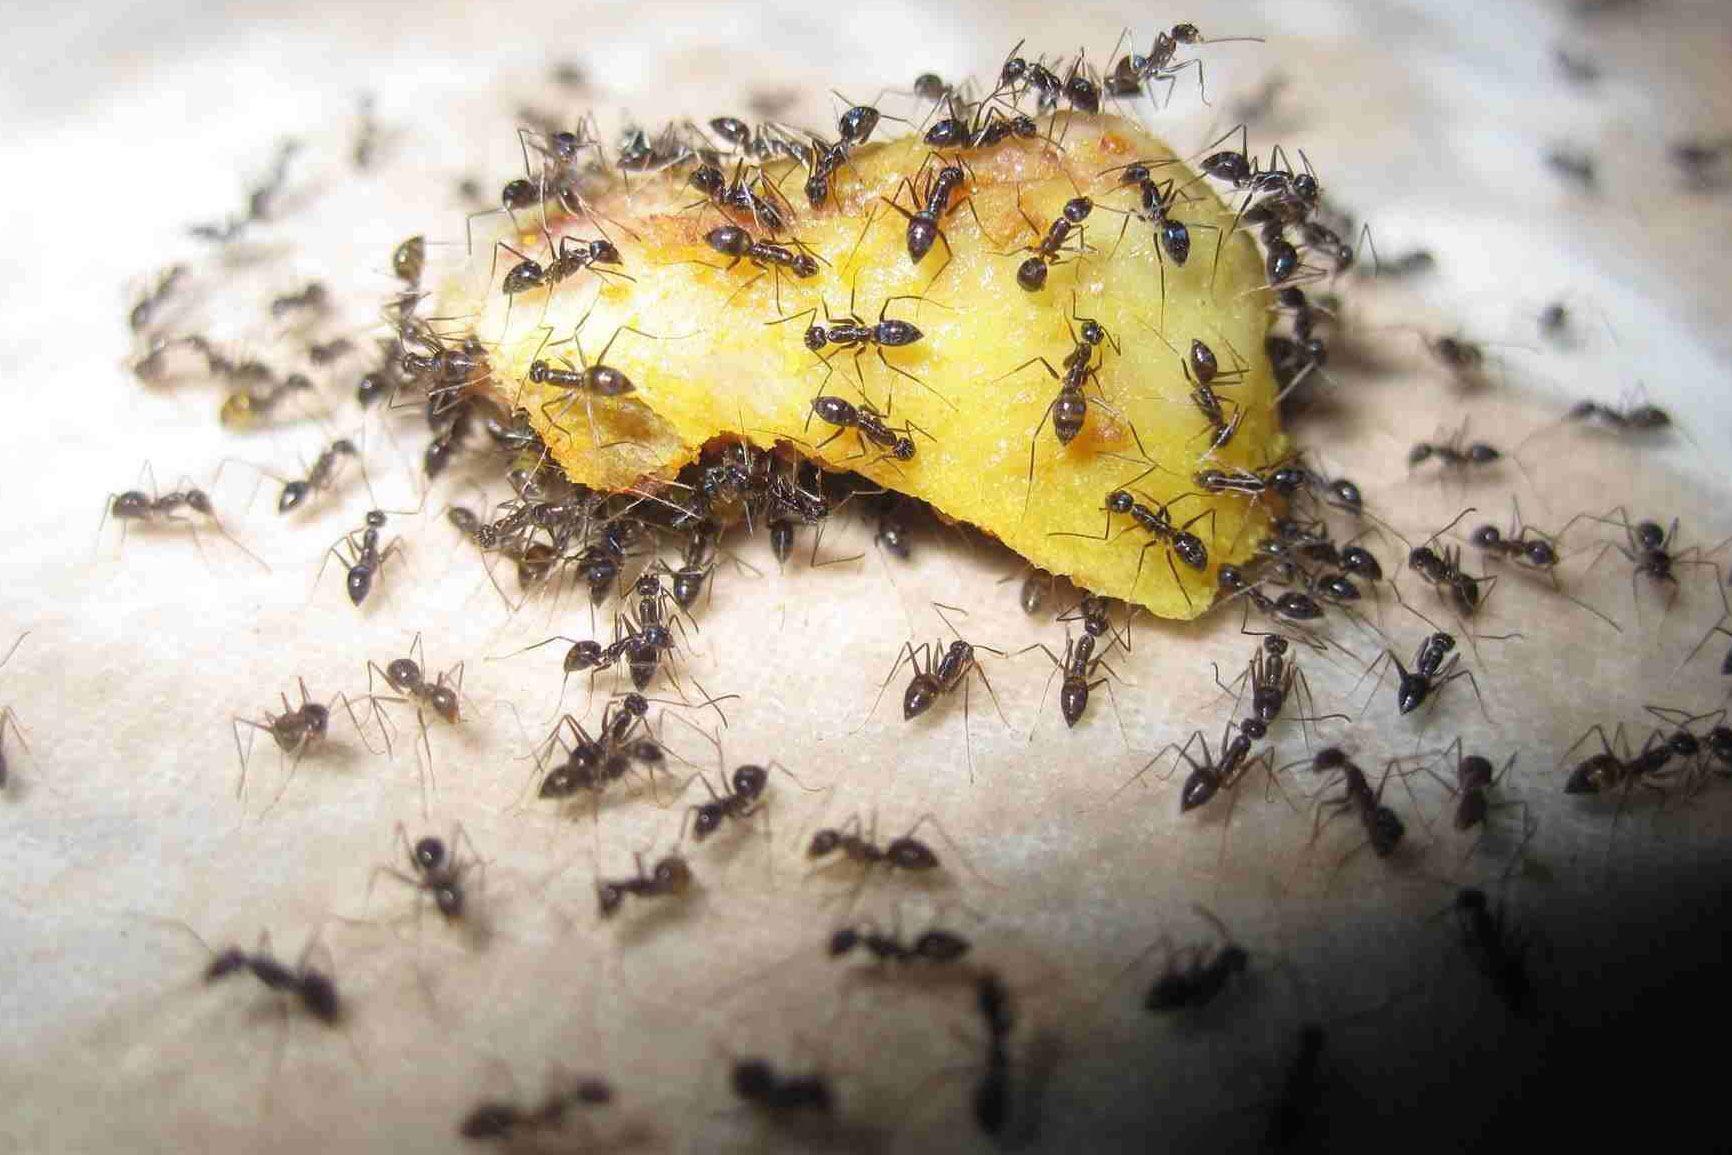 Ant Control - Ant Nest removal by SWAT Pest Control Ltd.